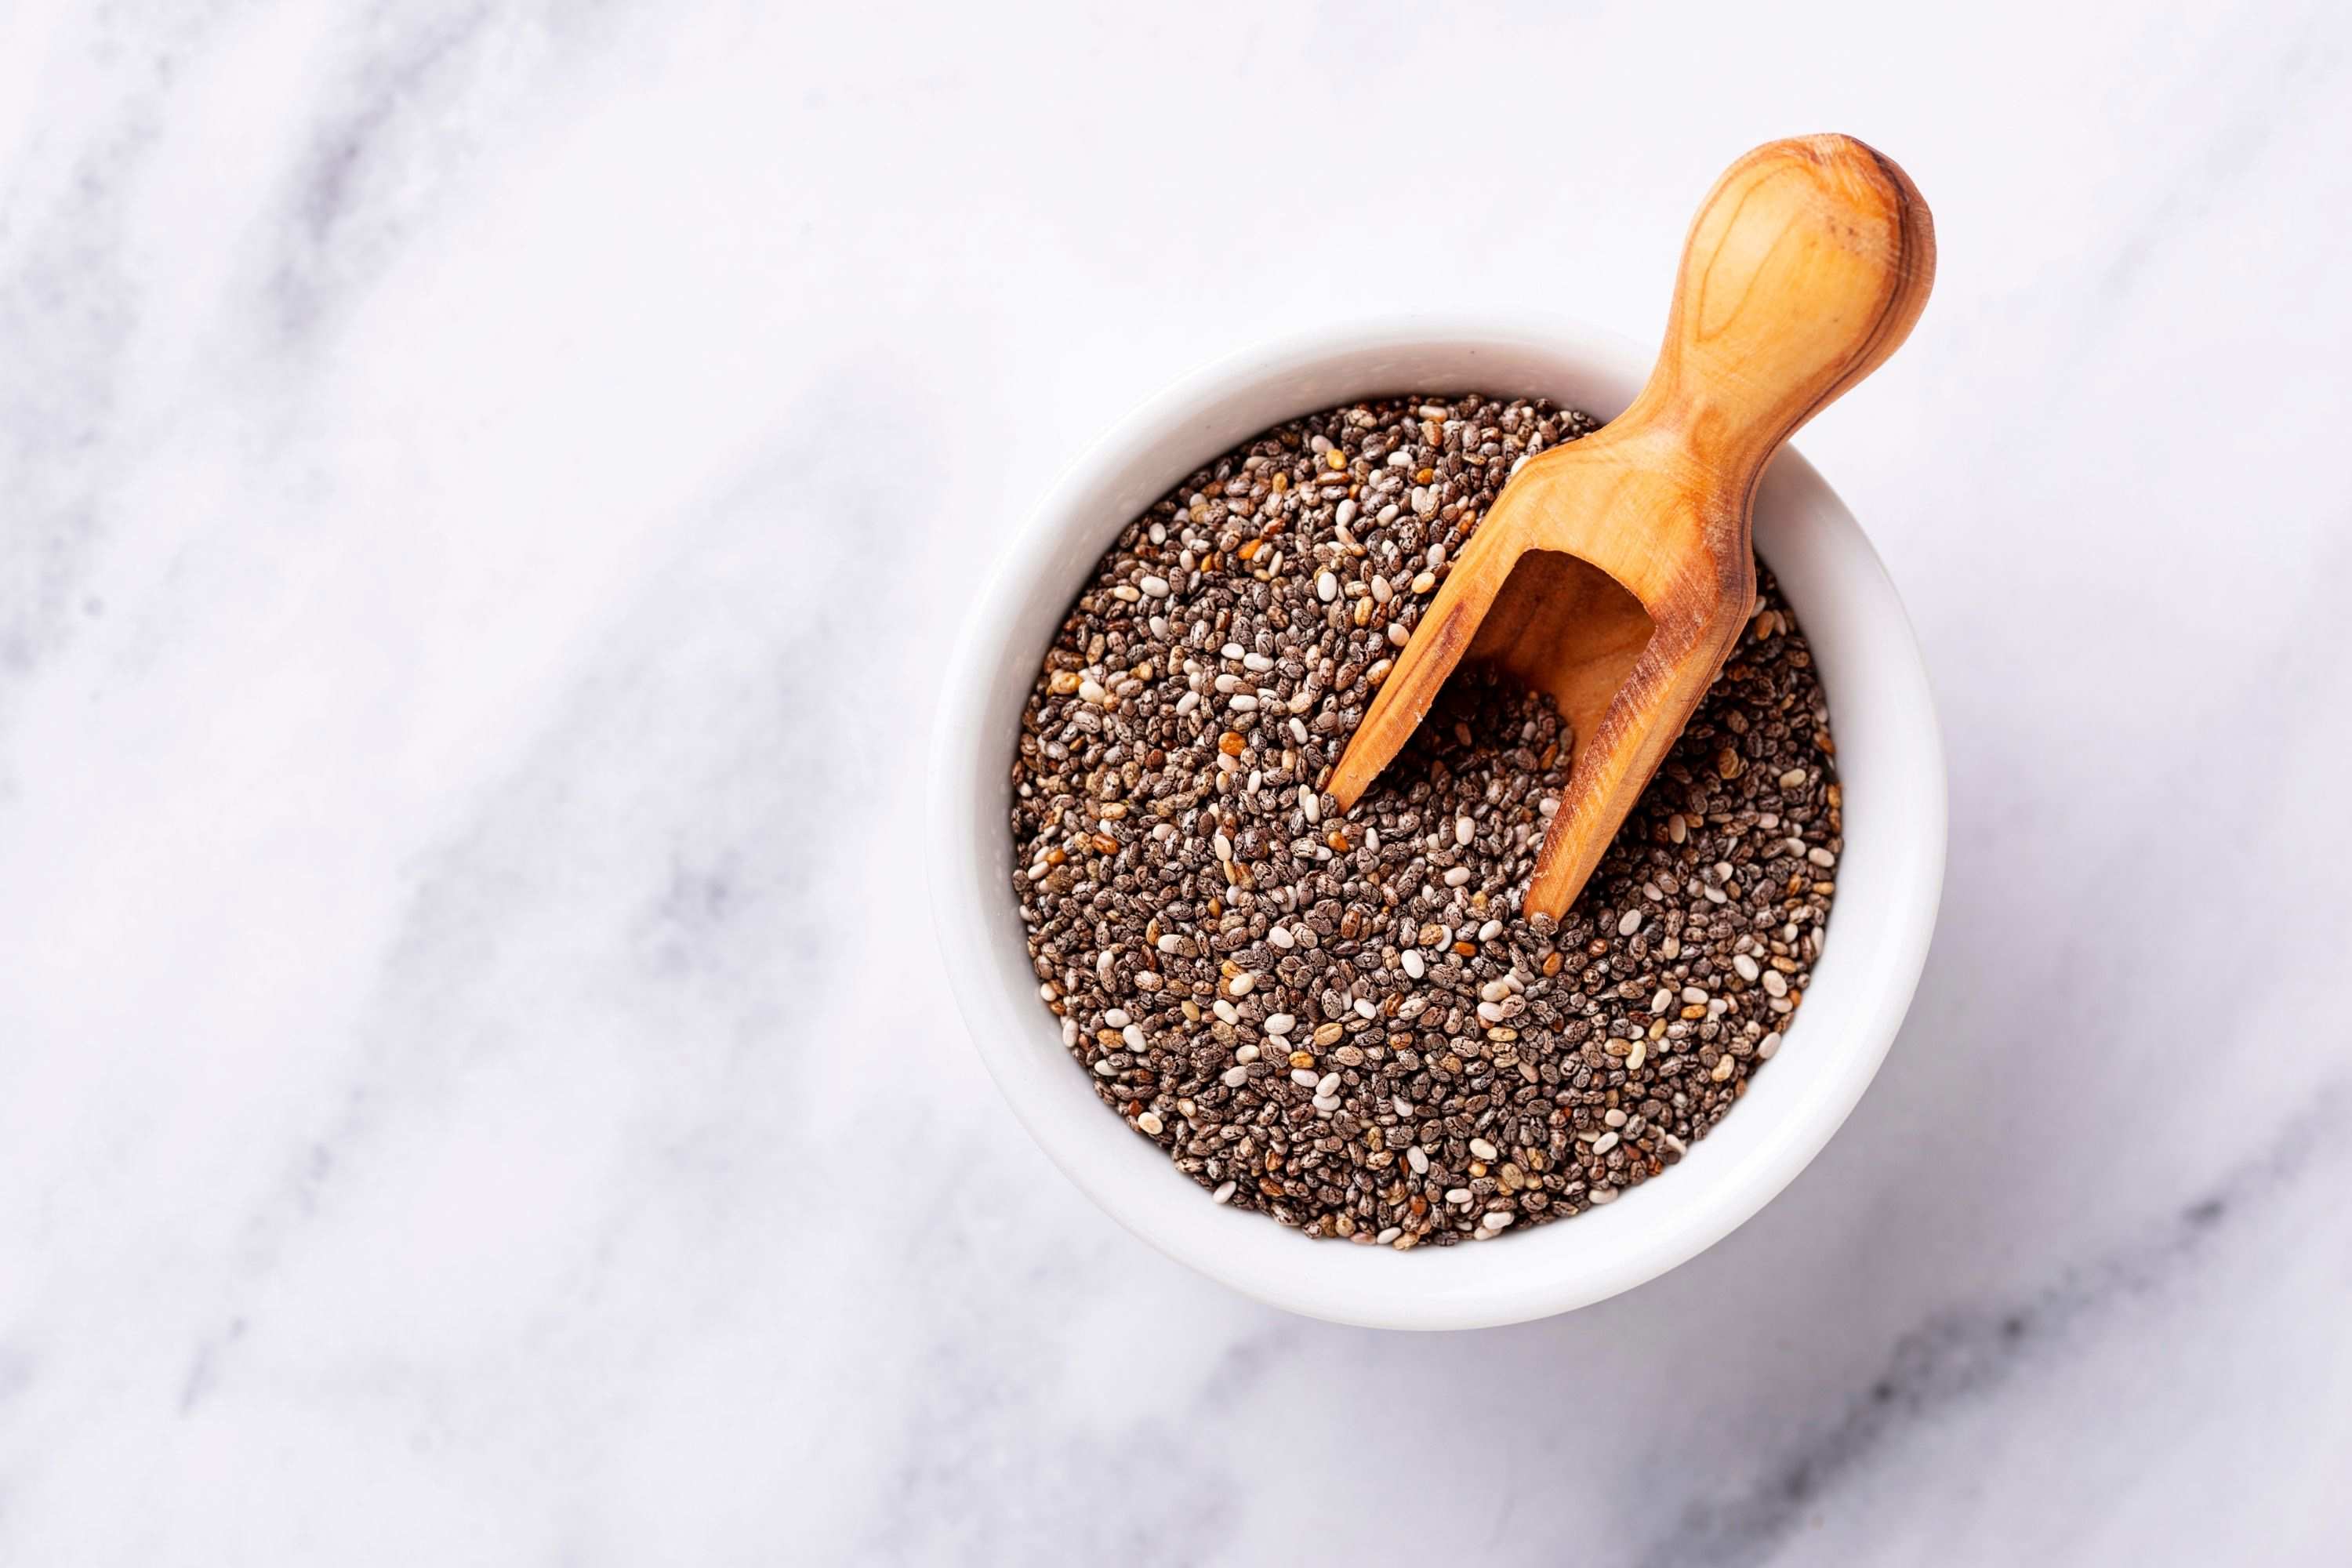 How To Know If Chia Seeds Have Gone Bad